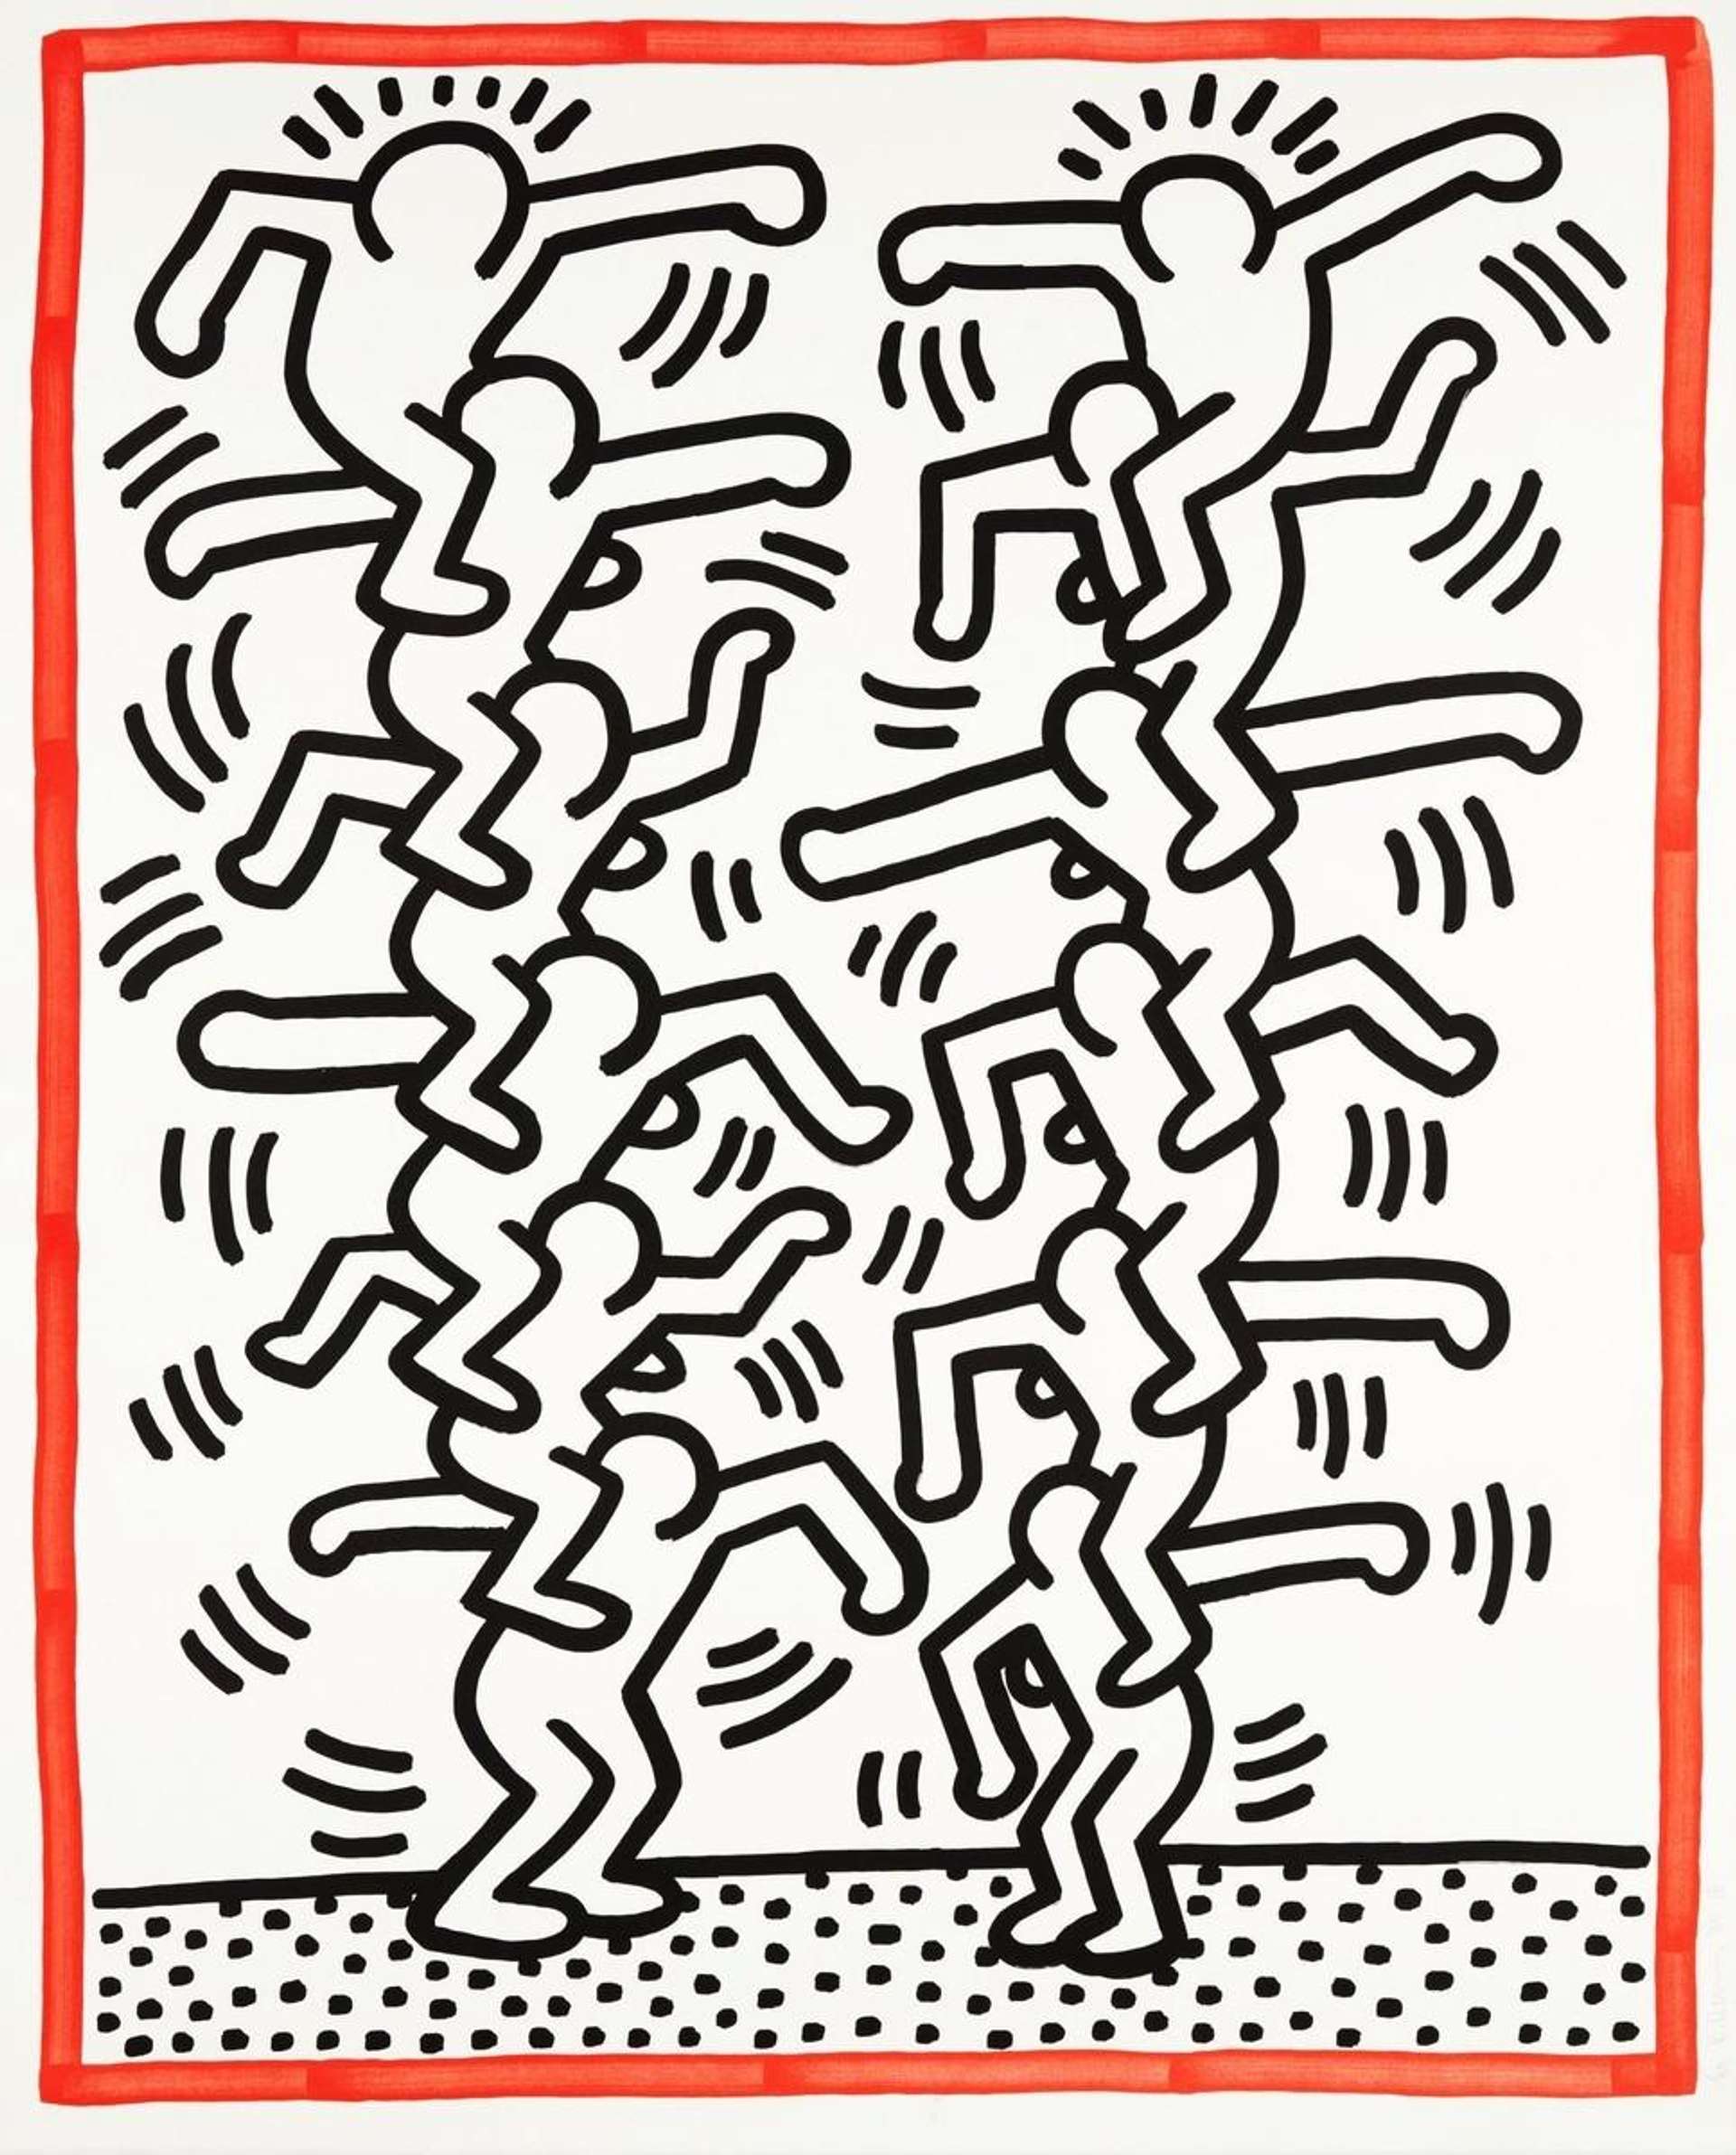 Three Lithographs 3 by Keith Haring